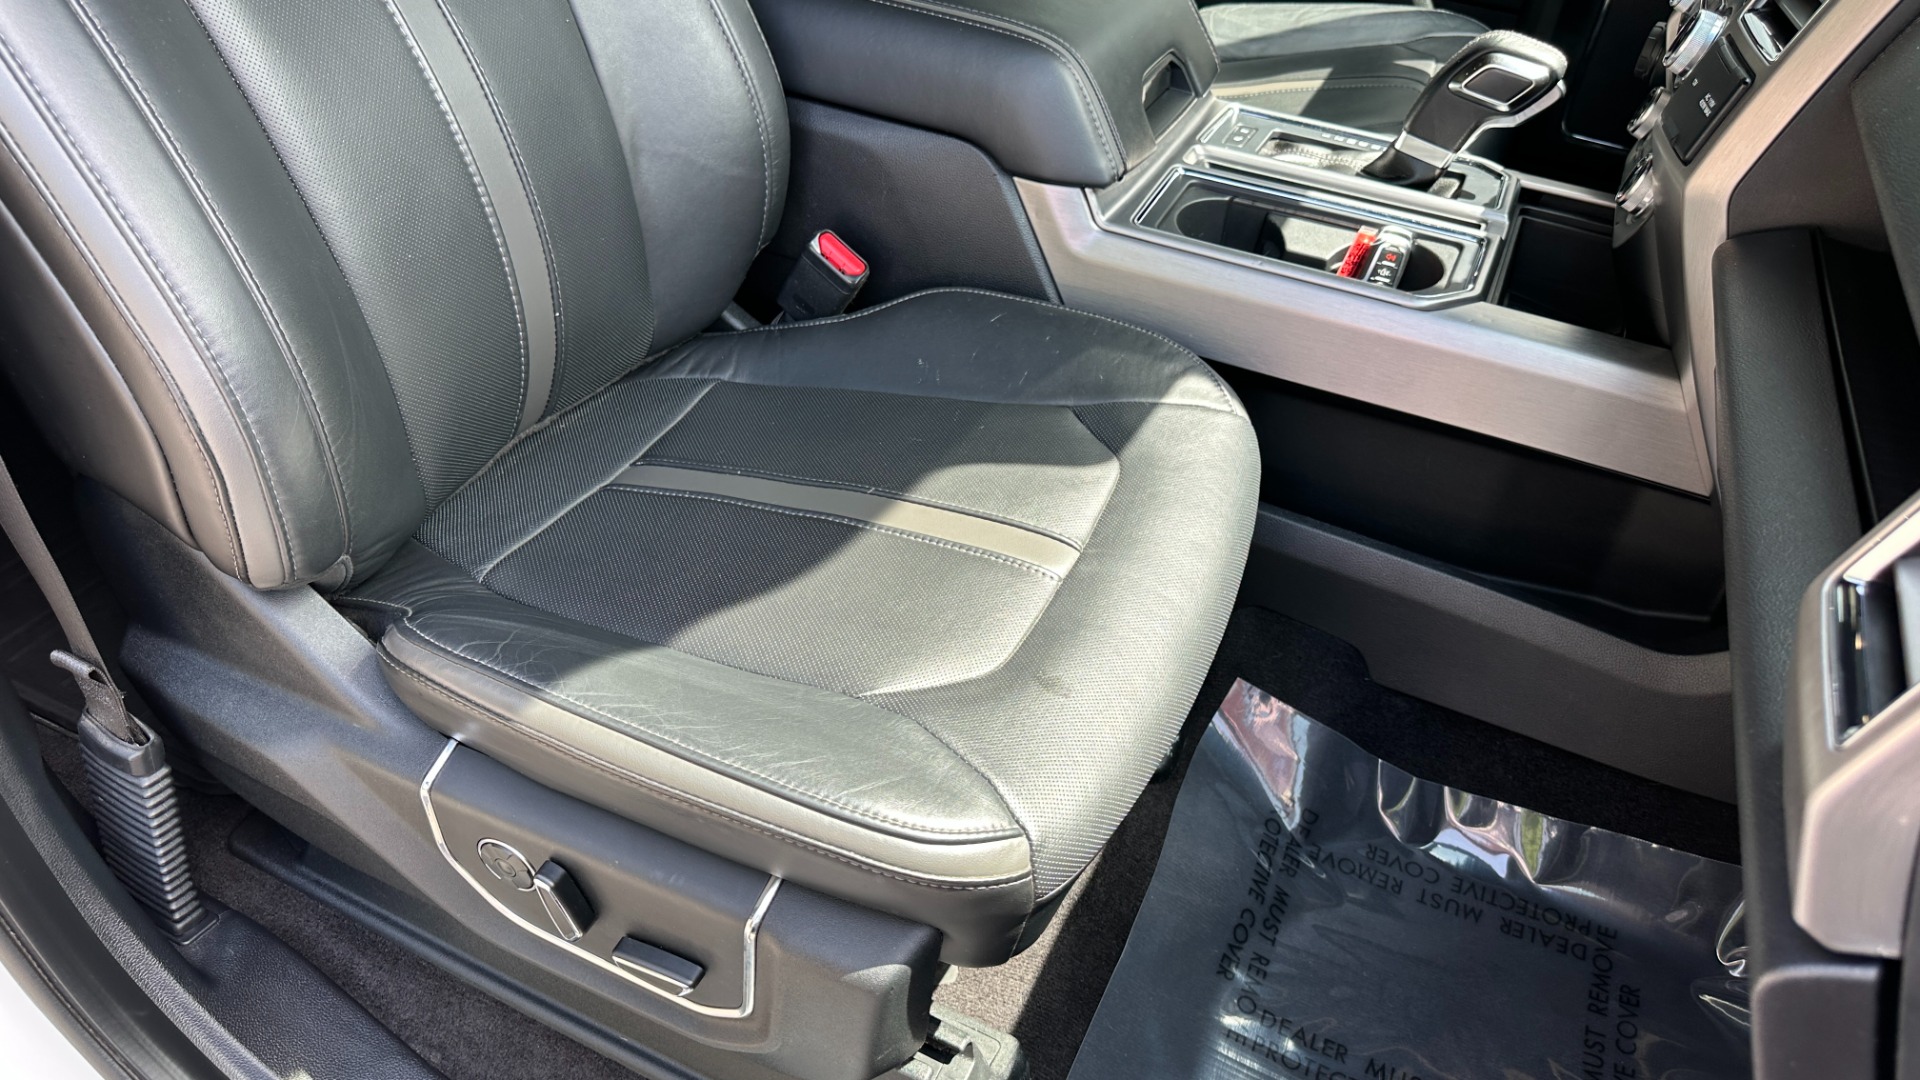 Used 2016 Ford F-150 PLATINUM / TECH PKG / BED COVER / LEATHER INTERIOR for sale $35,000 at Formula Imports in Charlotte NC 28227 37